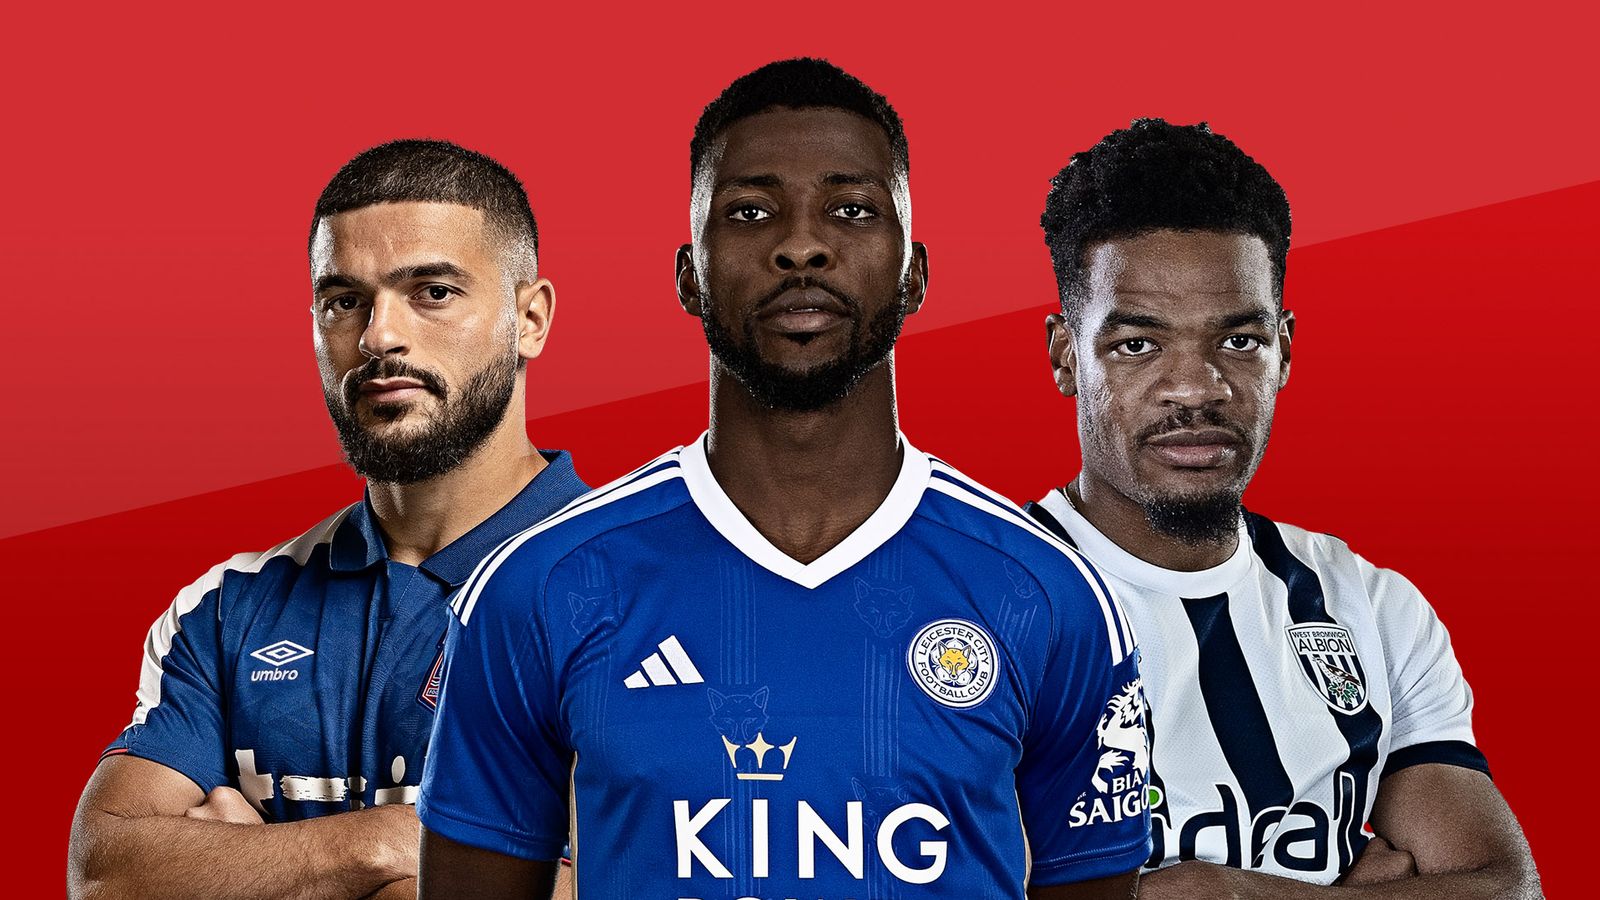 Newly Launched Kings League—Football Designed for the Digital Age